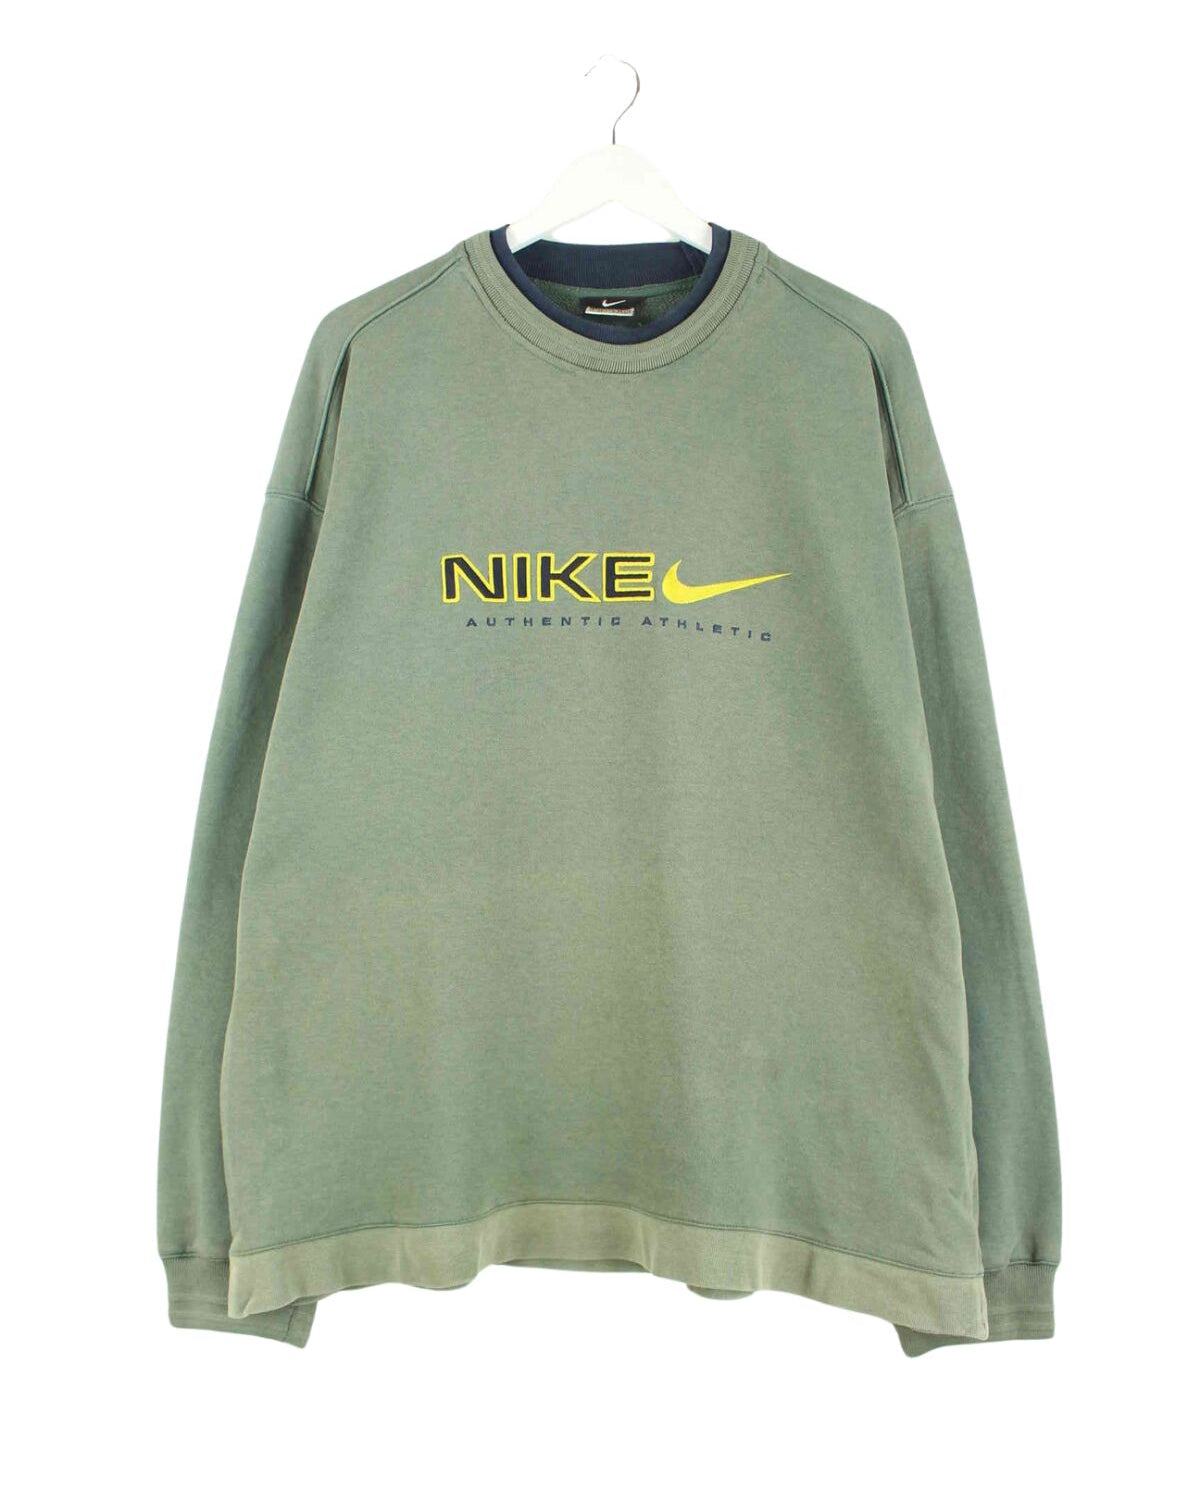 Nike 90s Vintage Embroidered Sweater Grün XL (front image)